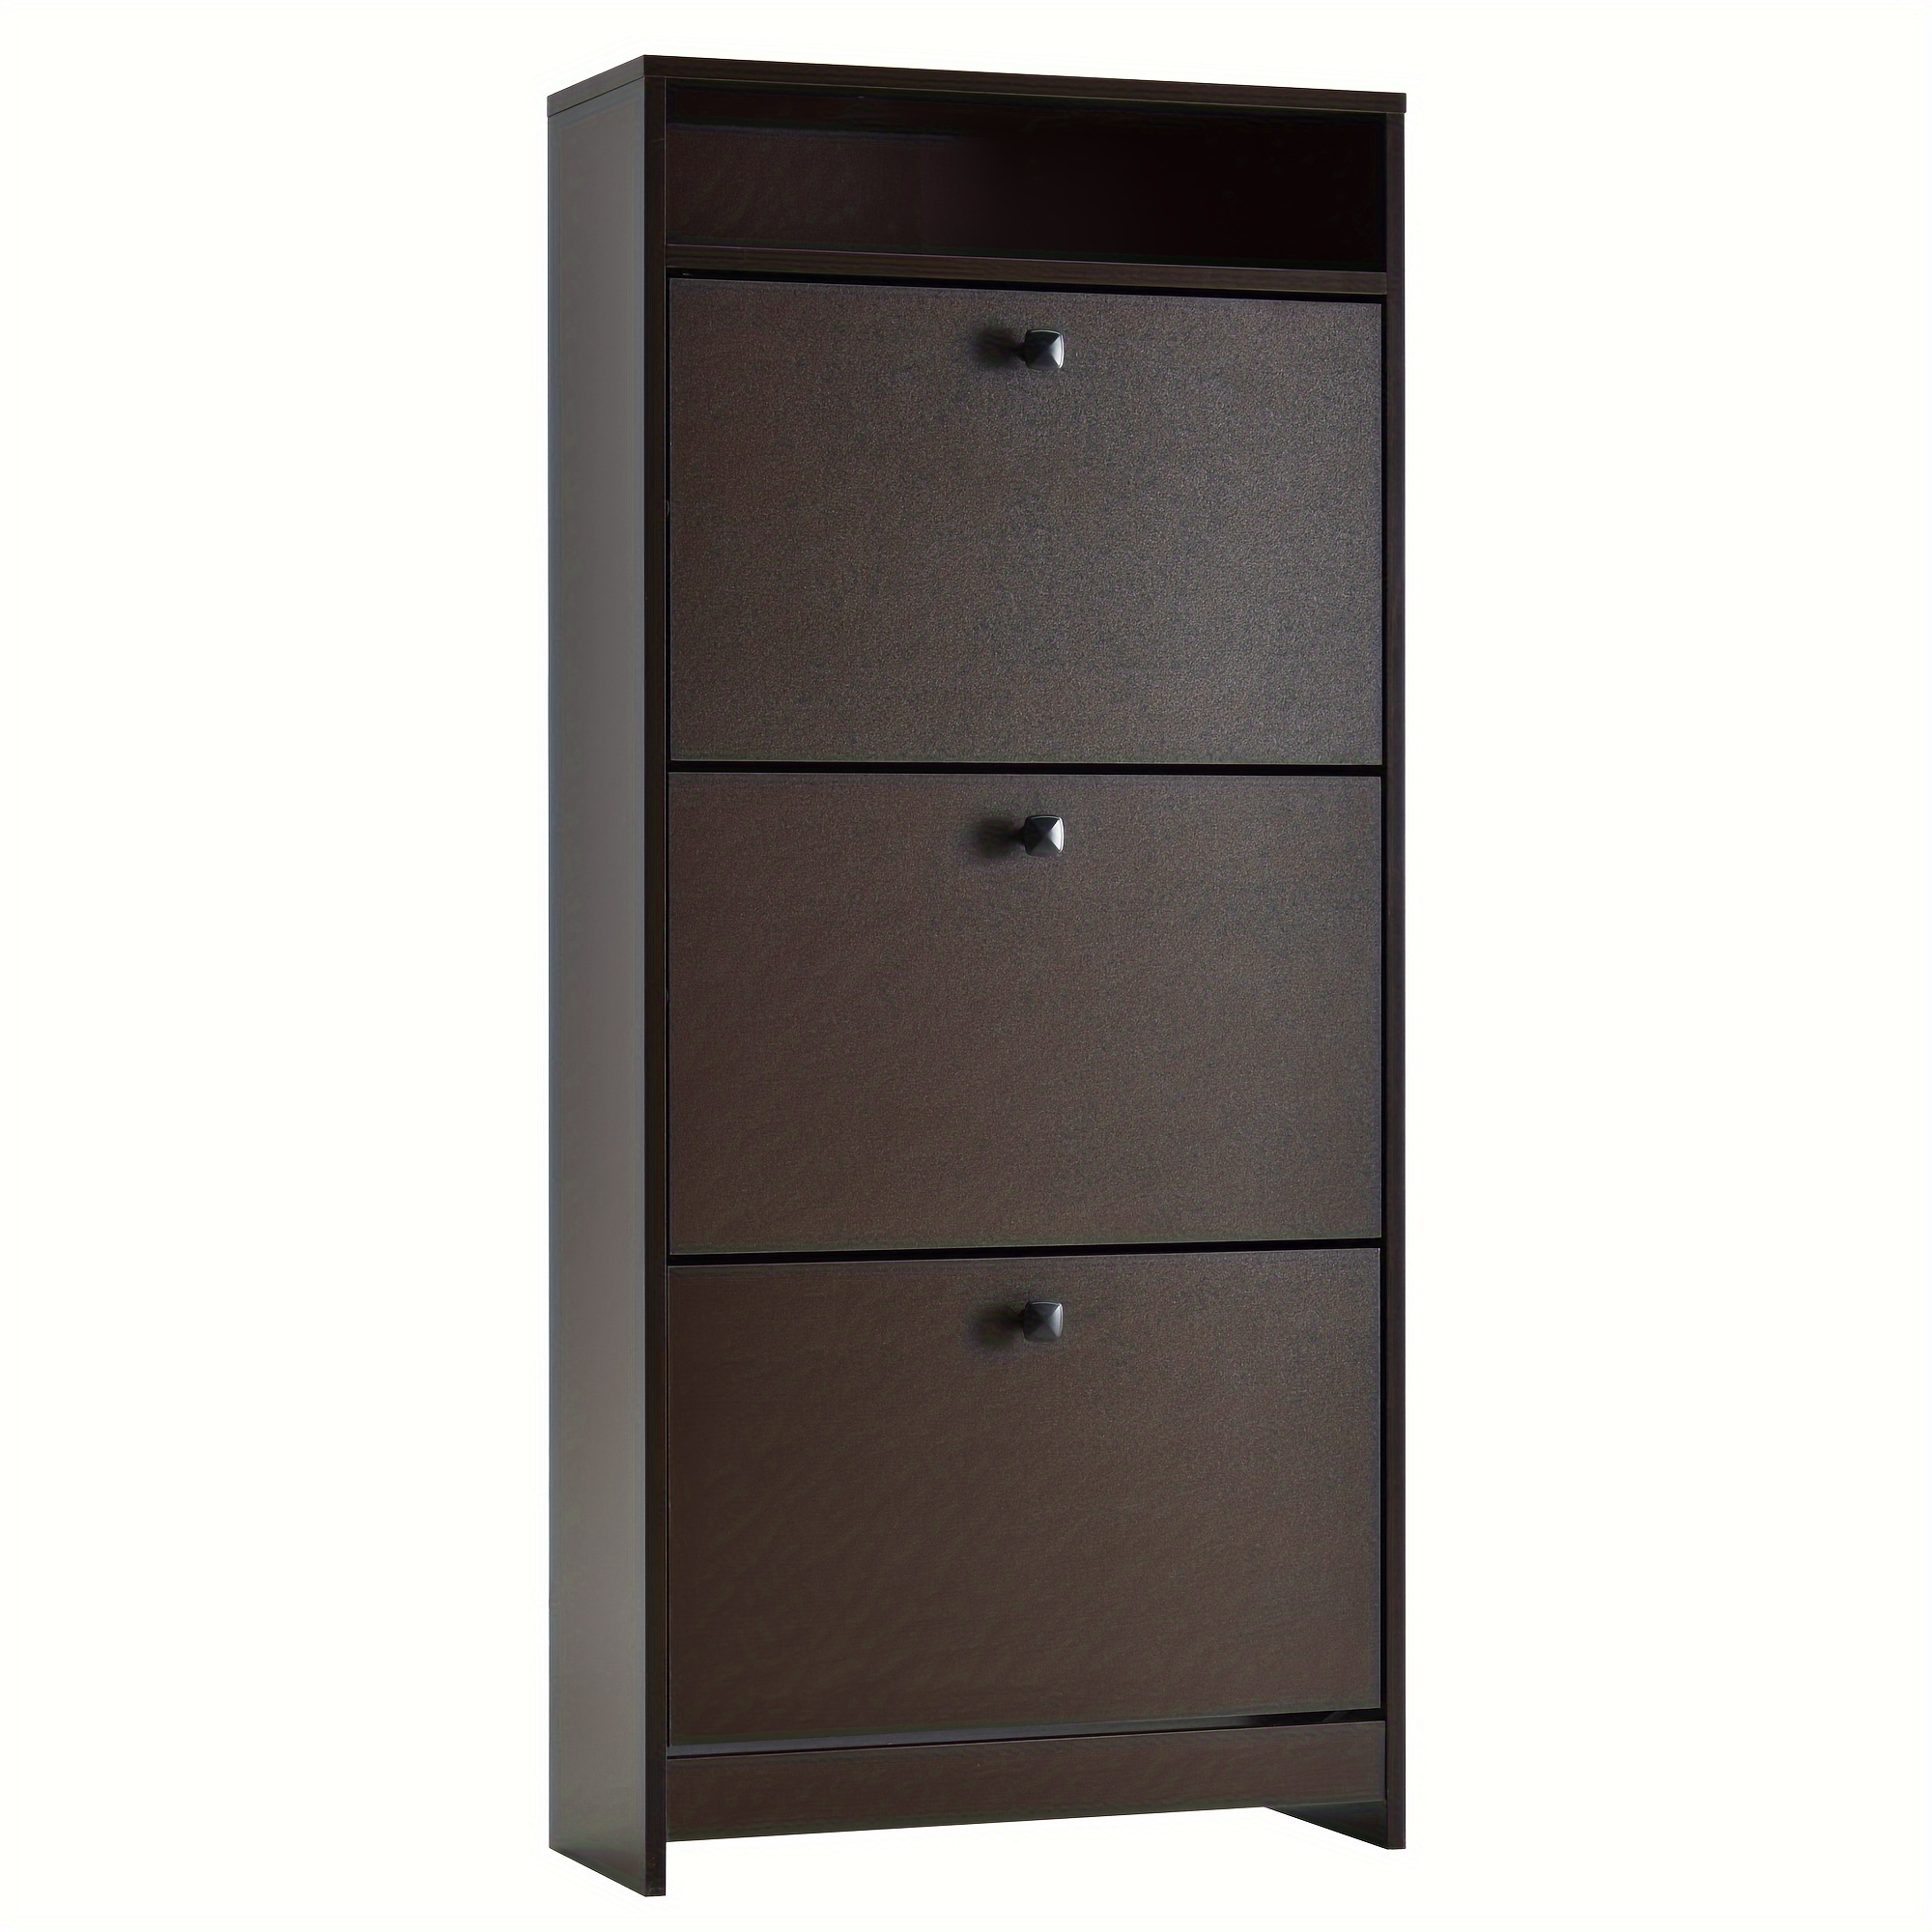 

Homcom Slim Shoe Cabinet, Trendy Shoe Storage Cabinet With 3 Large Drawers & A Spacious Top Surface For Small Items, Storage Cabinet